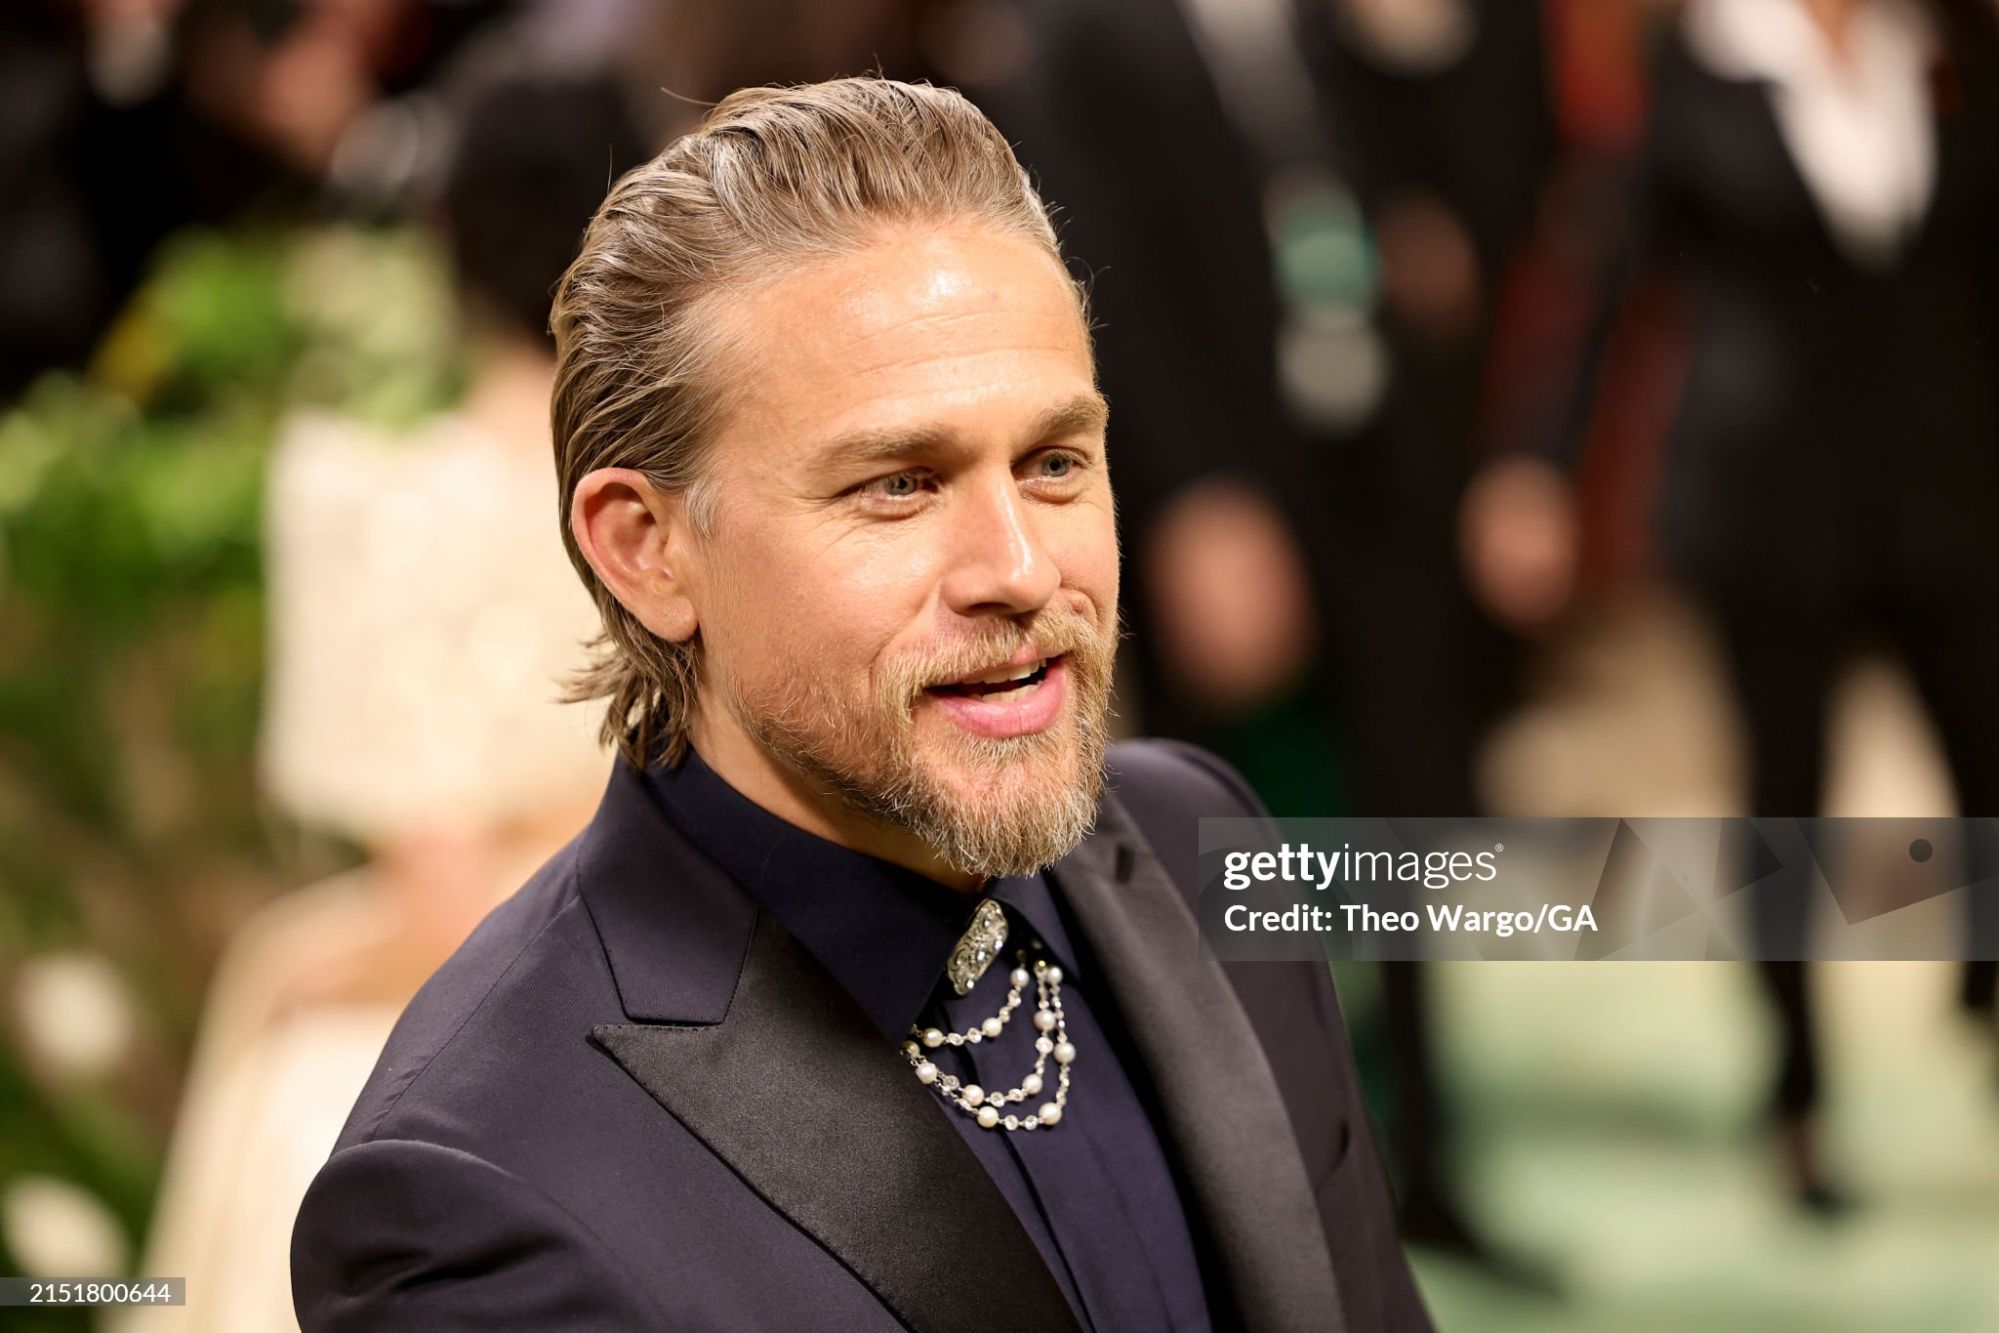 gettyimages-2151800644-2048x2048.jpg